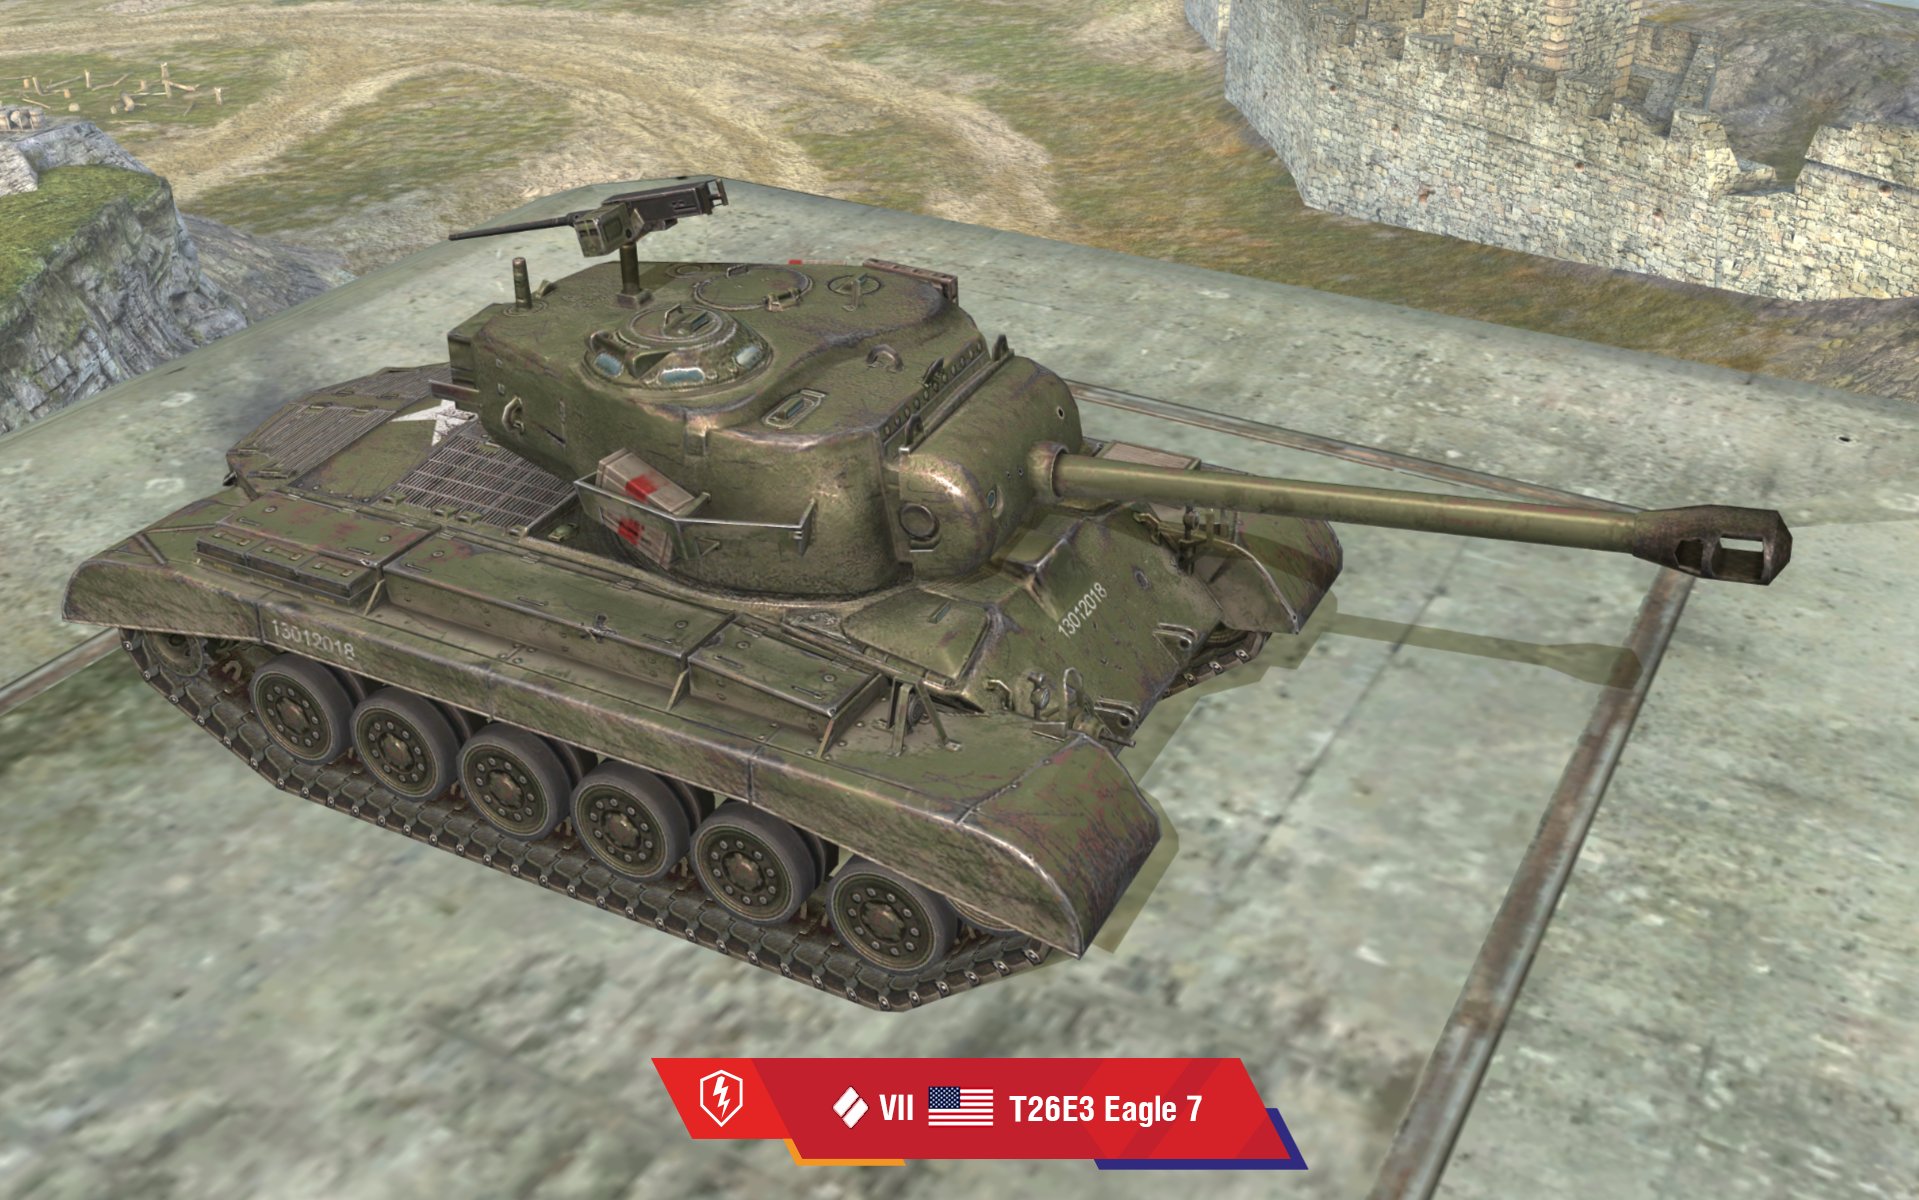 World Of Tanks Blitz On Twitter New Tank Coming Soon American T26e3 Eagle 7 Medium Tank Back In 1945 This Real World M26 Pershing Prototype Participated In The Battle Of Cologne 75